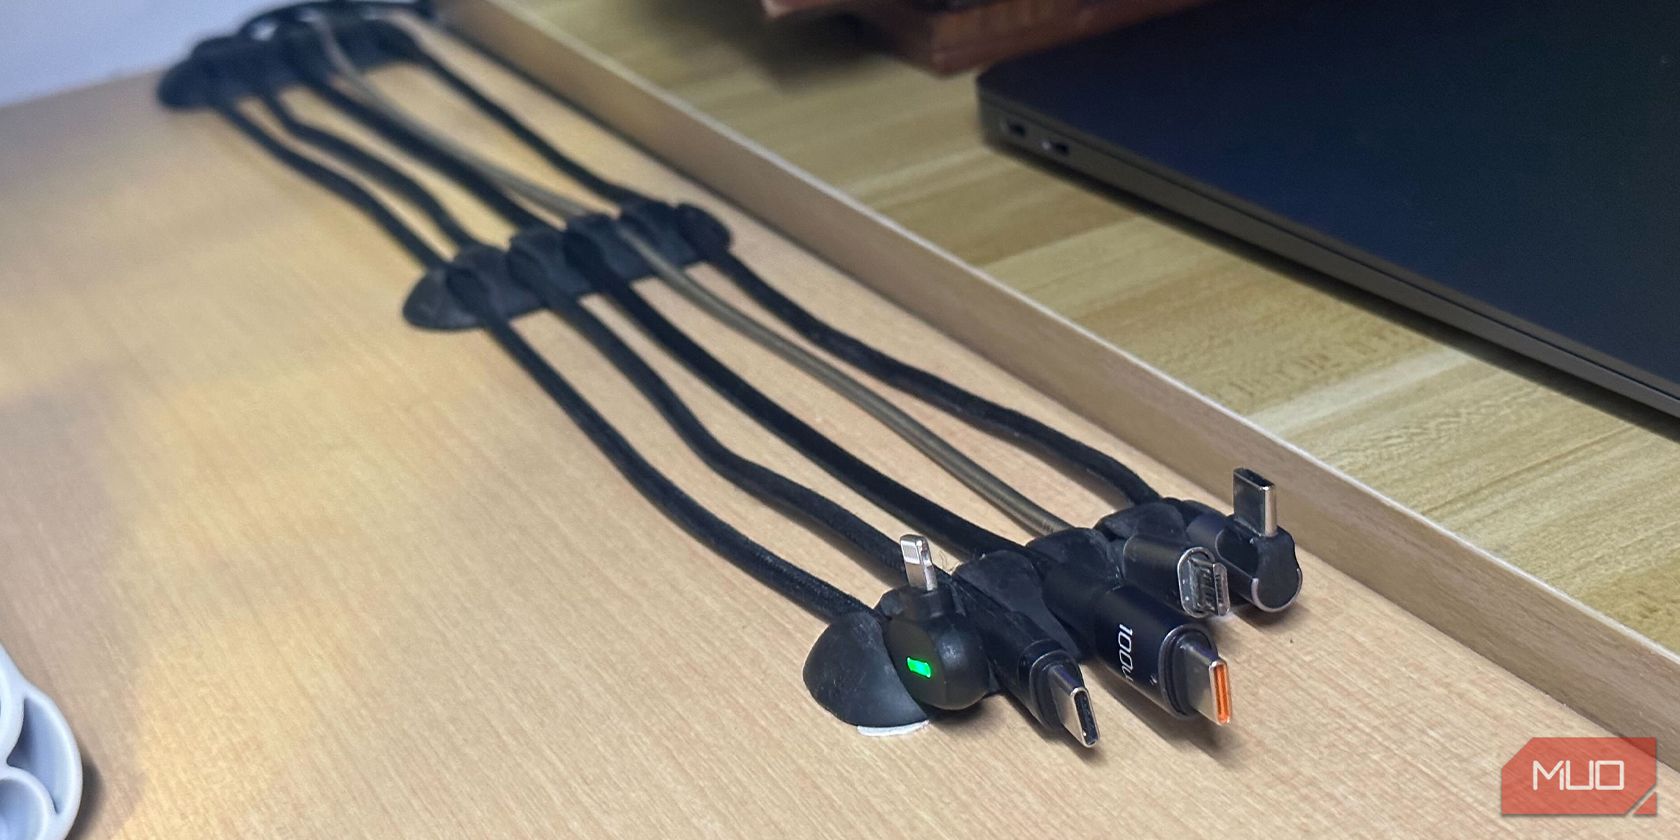 Charging cables organized with rubber clips